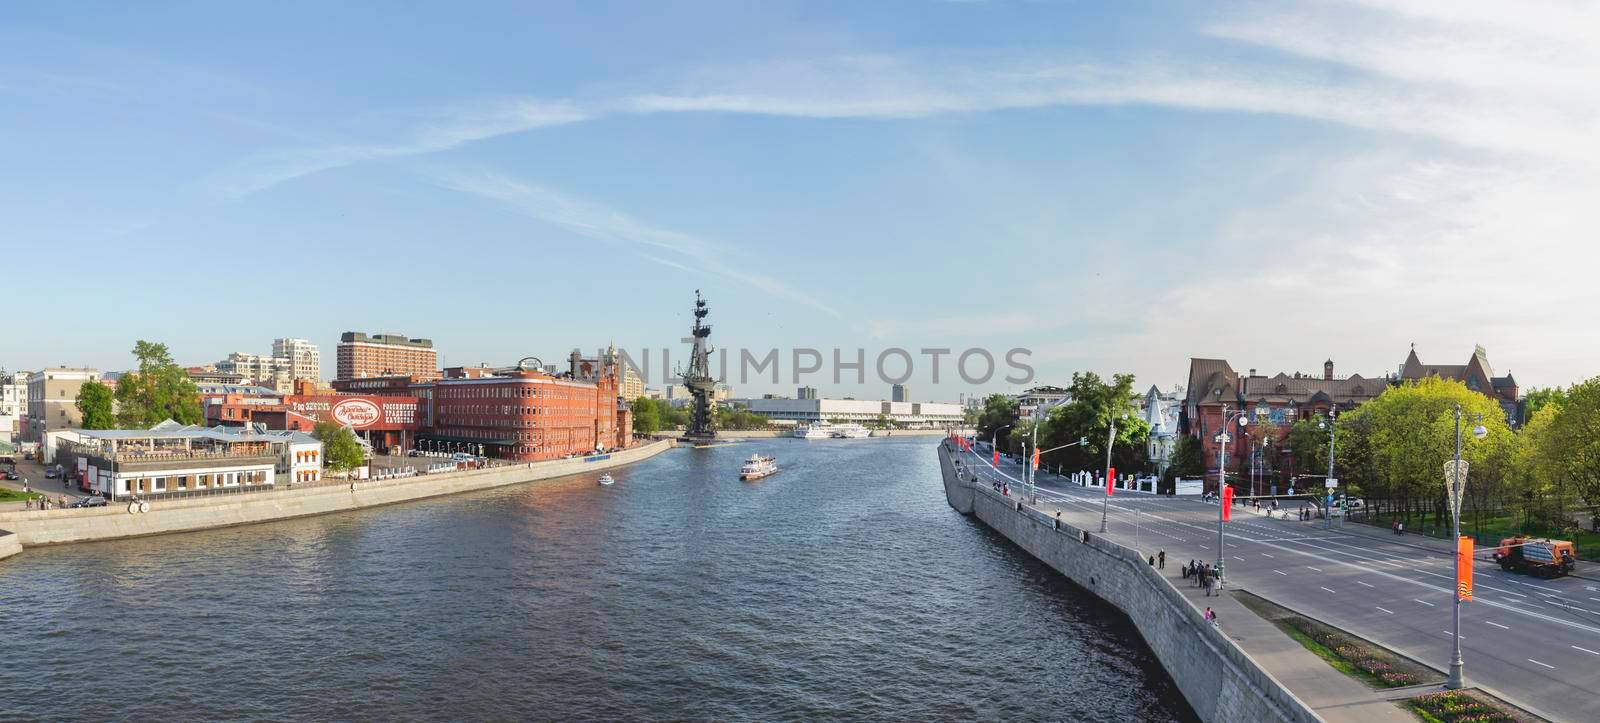 MOSCOW, RUSSIA - May 9, 2015. Panorama view Patriarshiy bridge. Monument to Russian emperor Peter the Great by Zurab Tseretely, Red October factory, Central House of Artists. by aksenovko